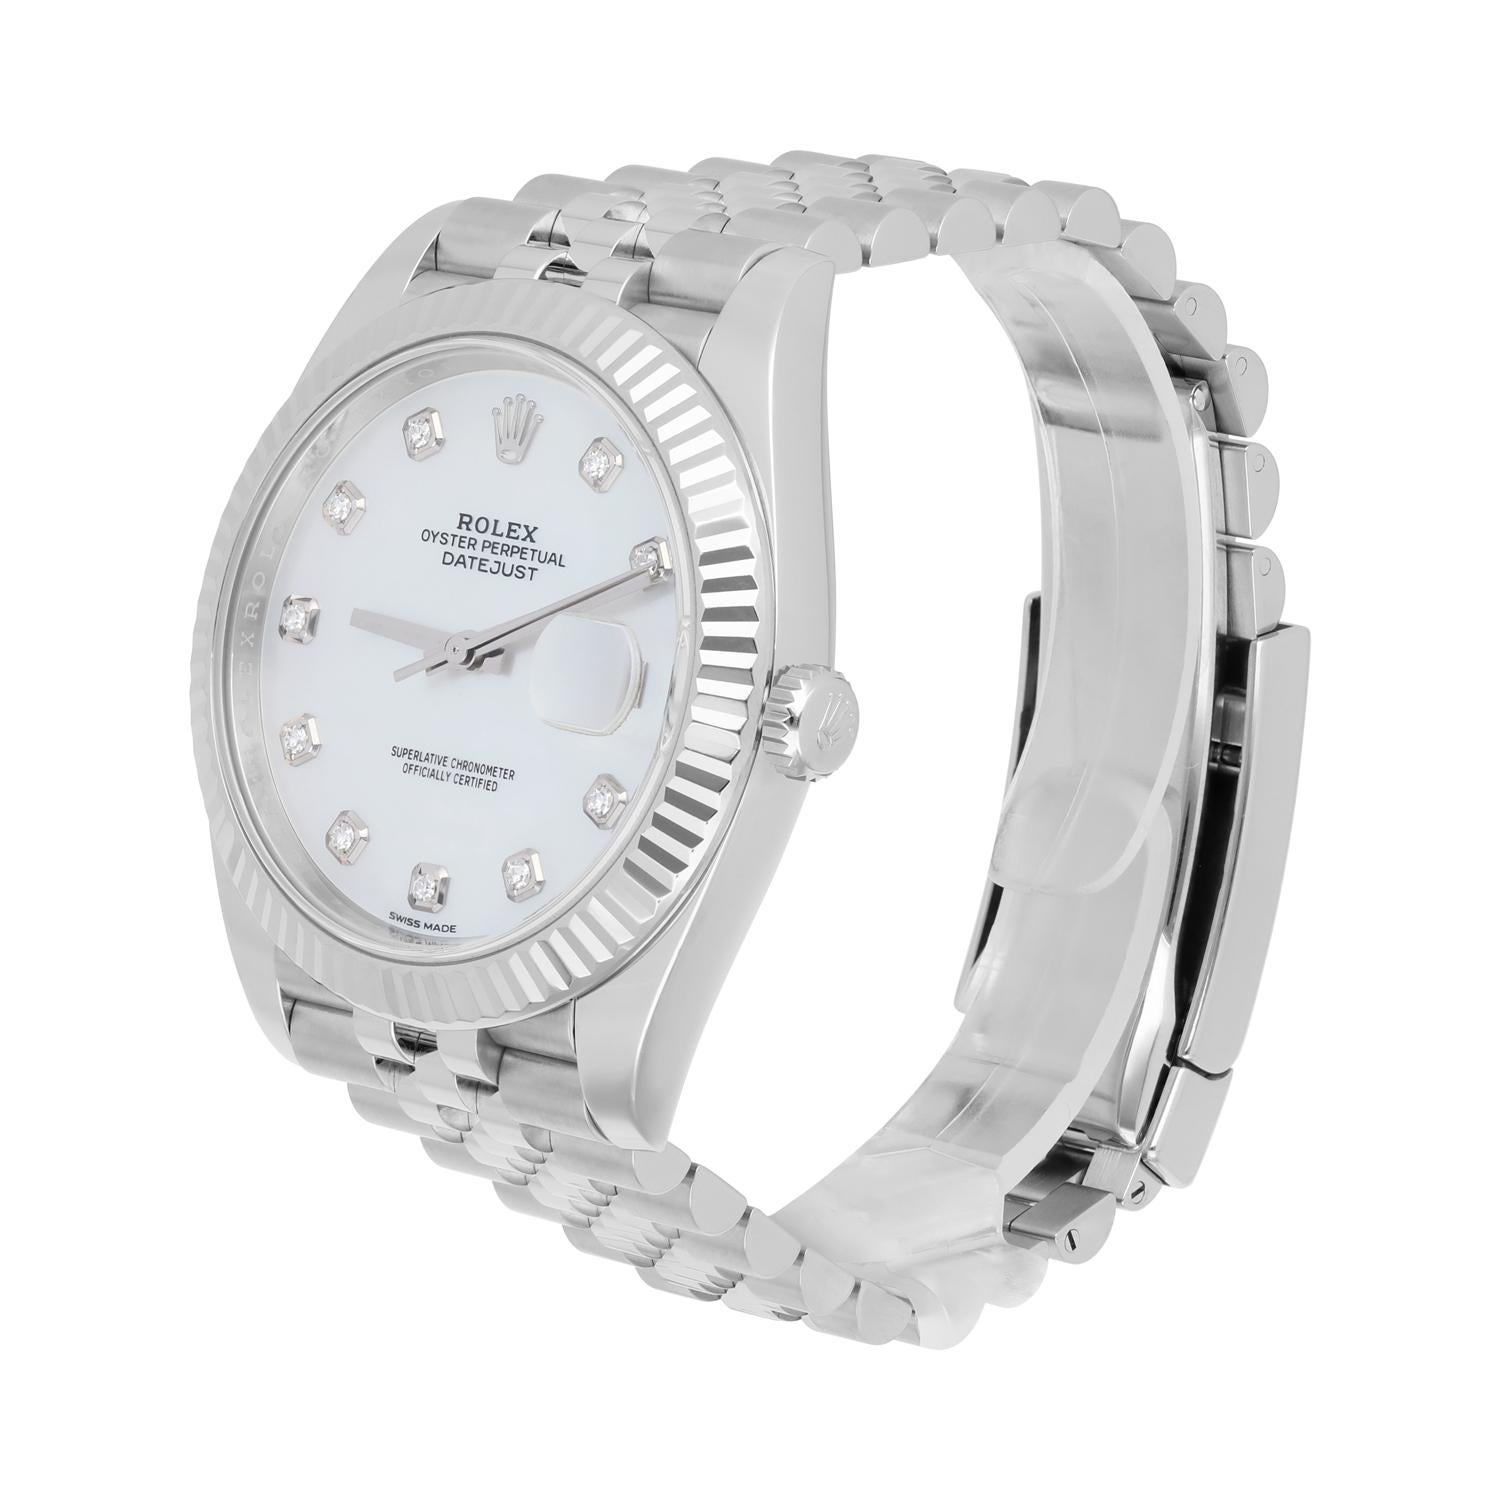 Rolex Datejust 41 Steel/18K White Gold White Mother of Pearl Dial Jubilee 126334 For Sale 1